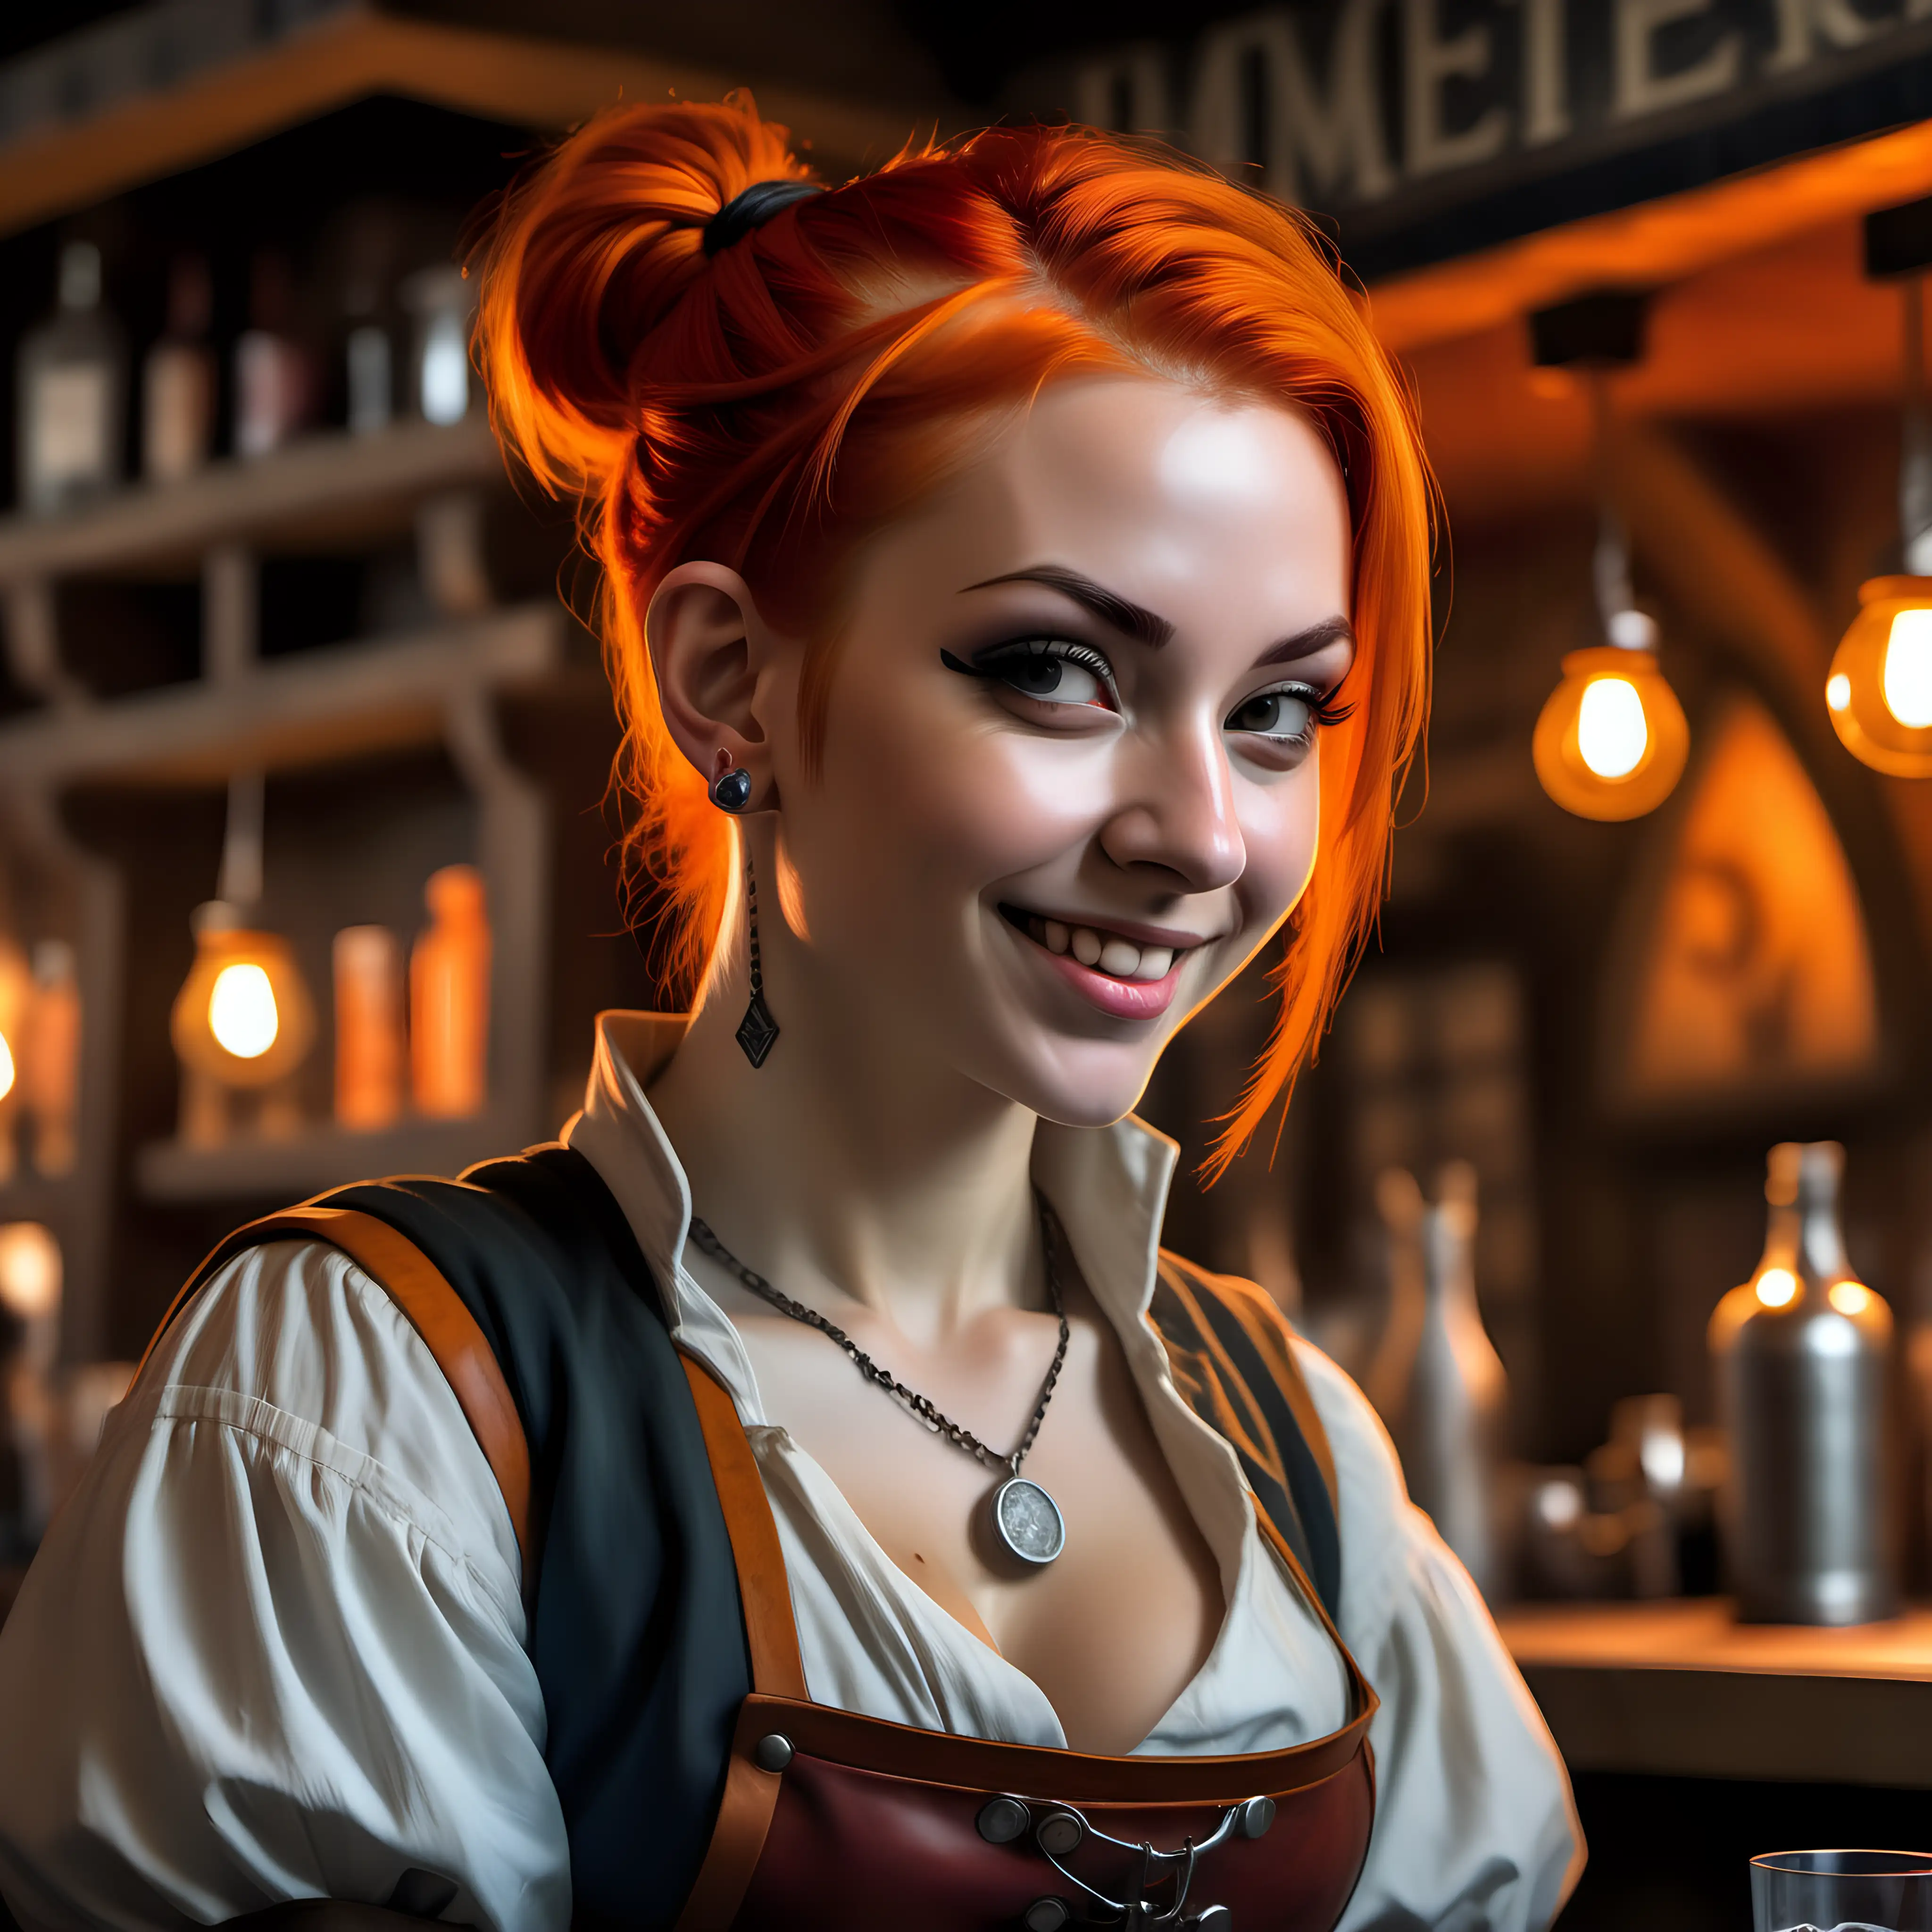 female rogue, amused expression, cute, strong, amulet necklace, small stud earrings, bright orange hair in a tight bun, bartending, medieval fantasy, small tavern, super-detailed, hyper-realistic